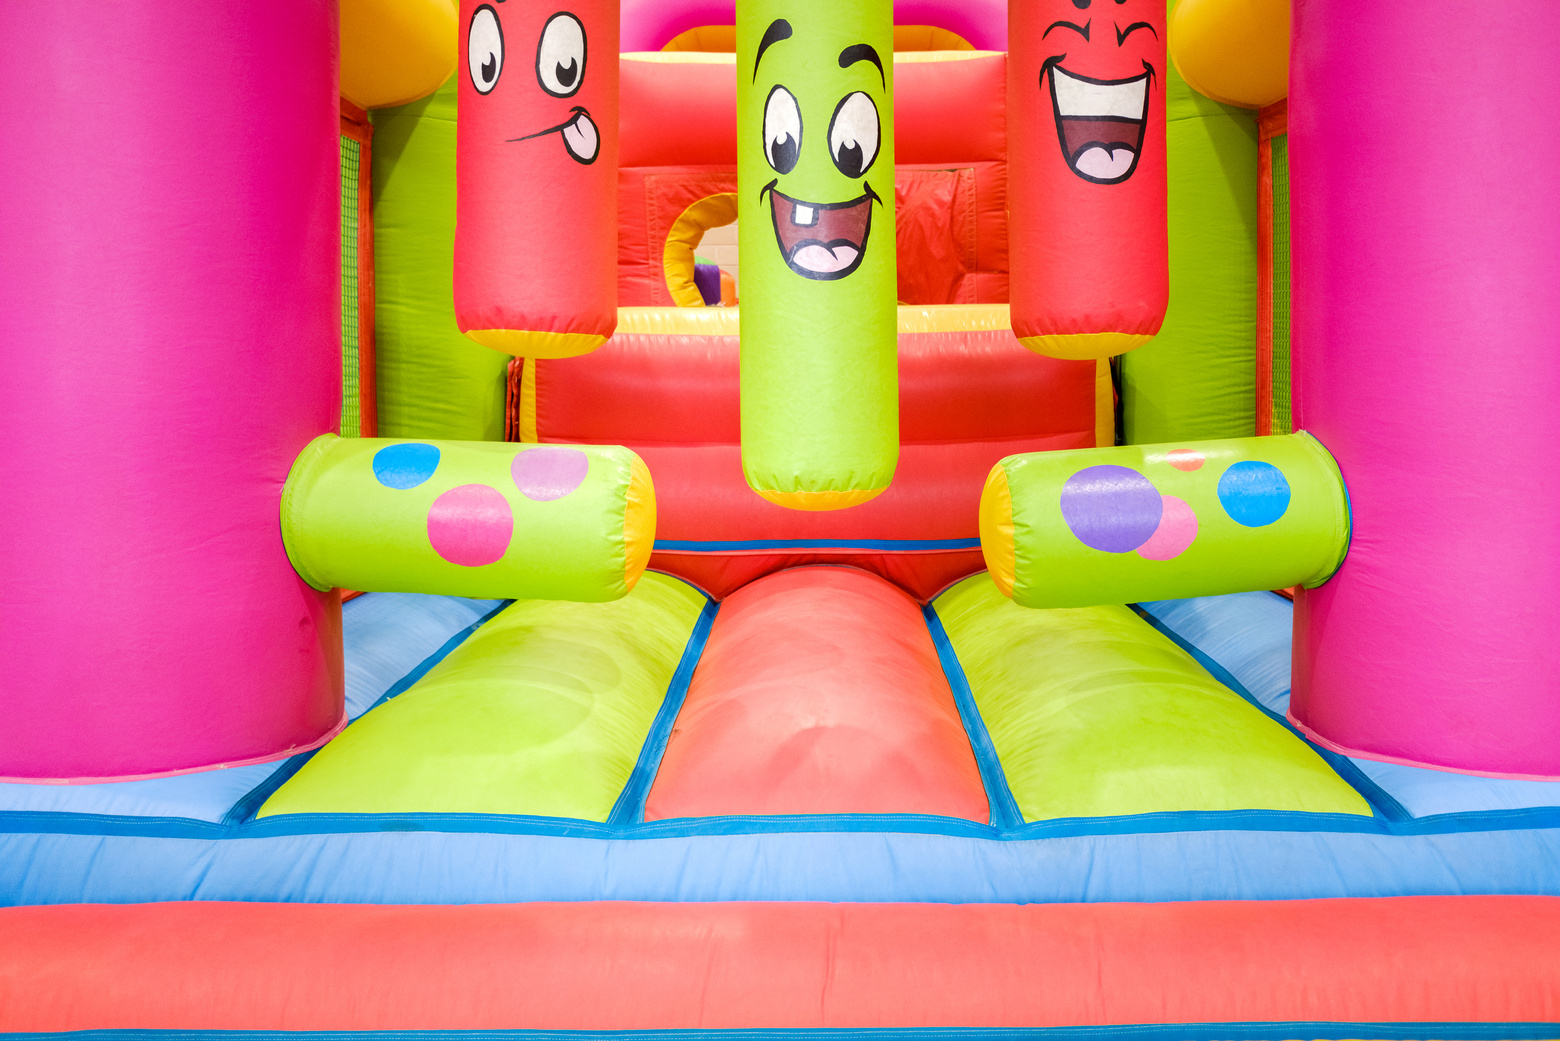 Detail of an Inflatable Castle to Bounce.